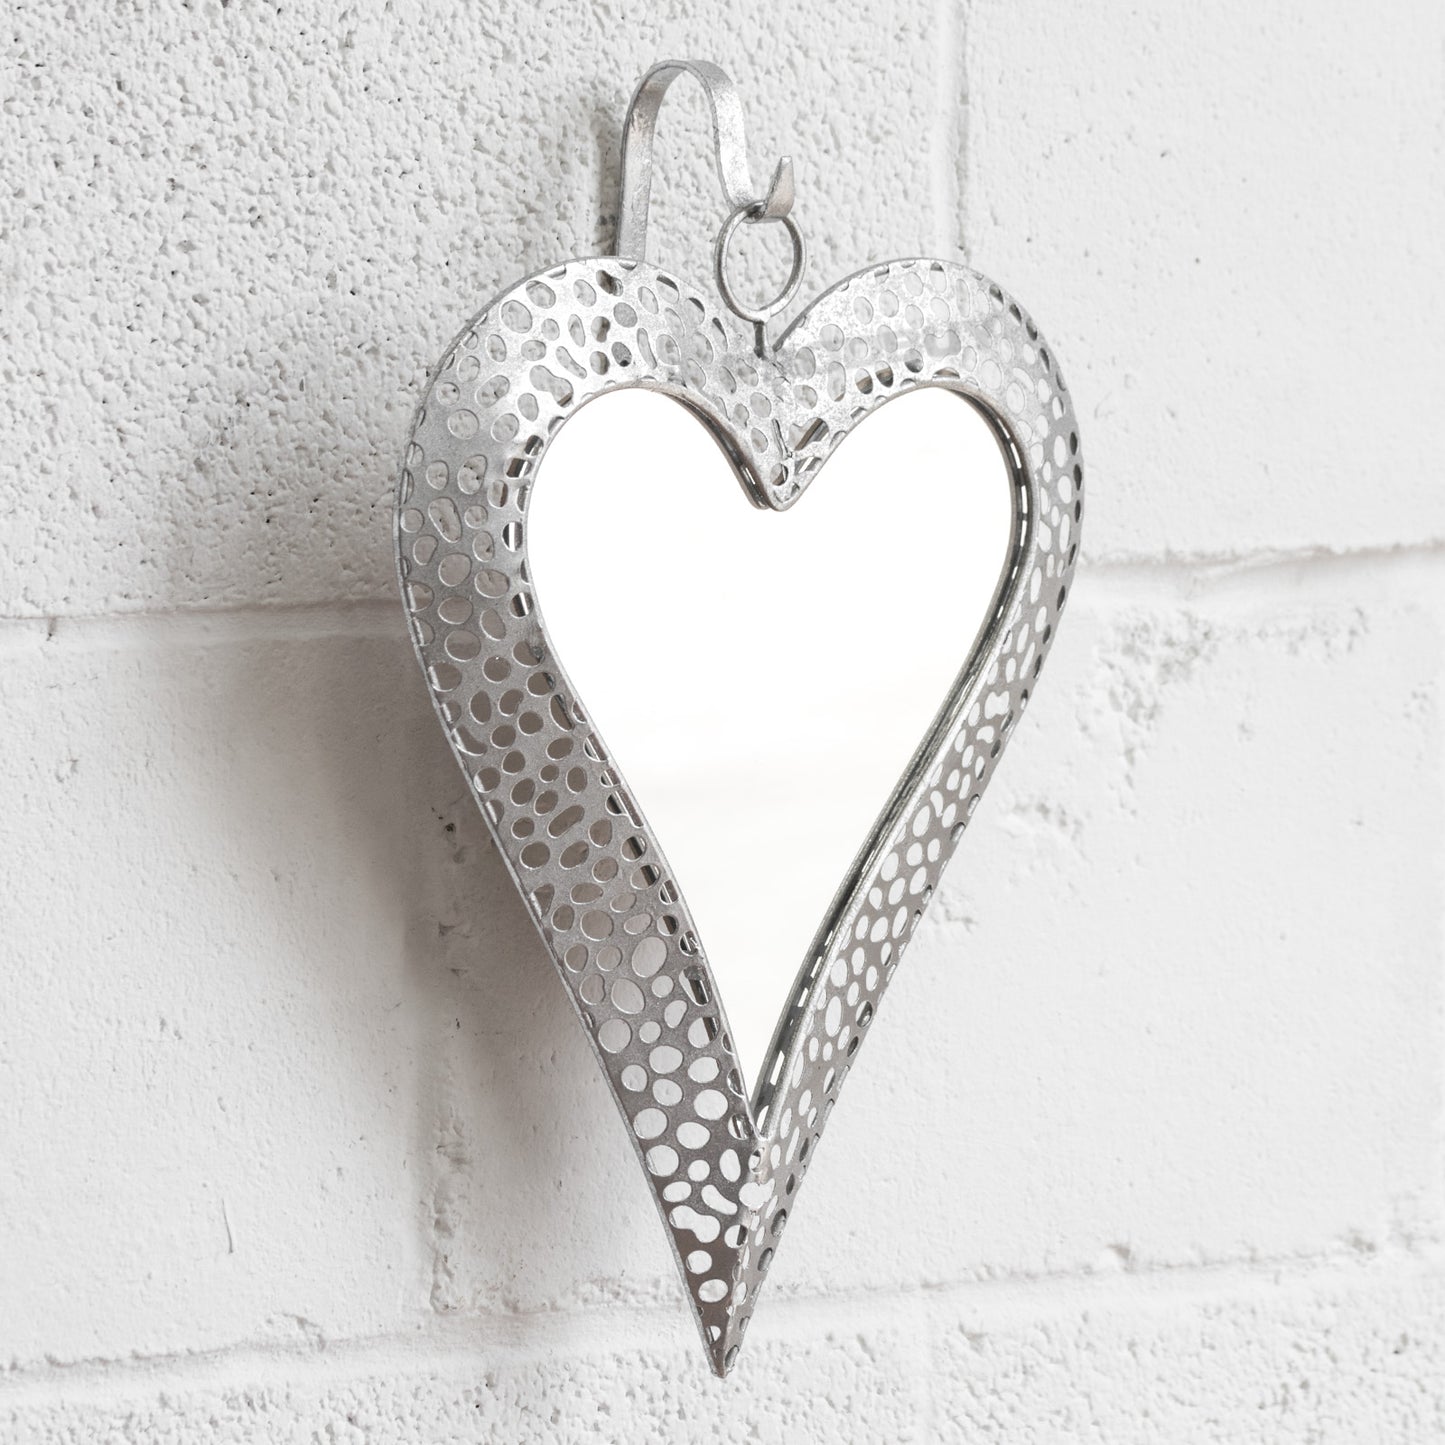 Silver Hanging Heart Wall Mirror Decoration